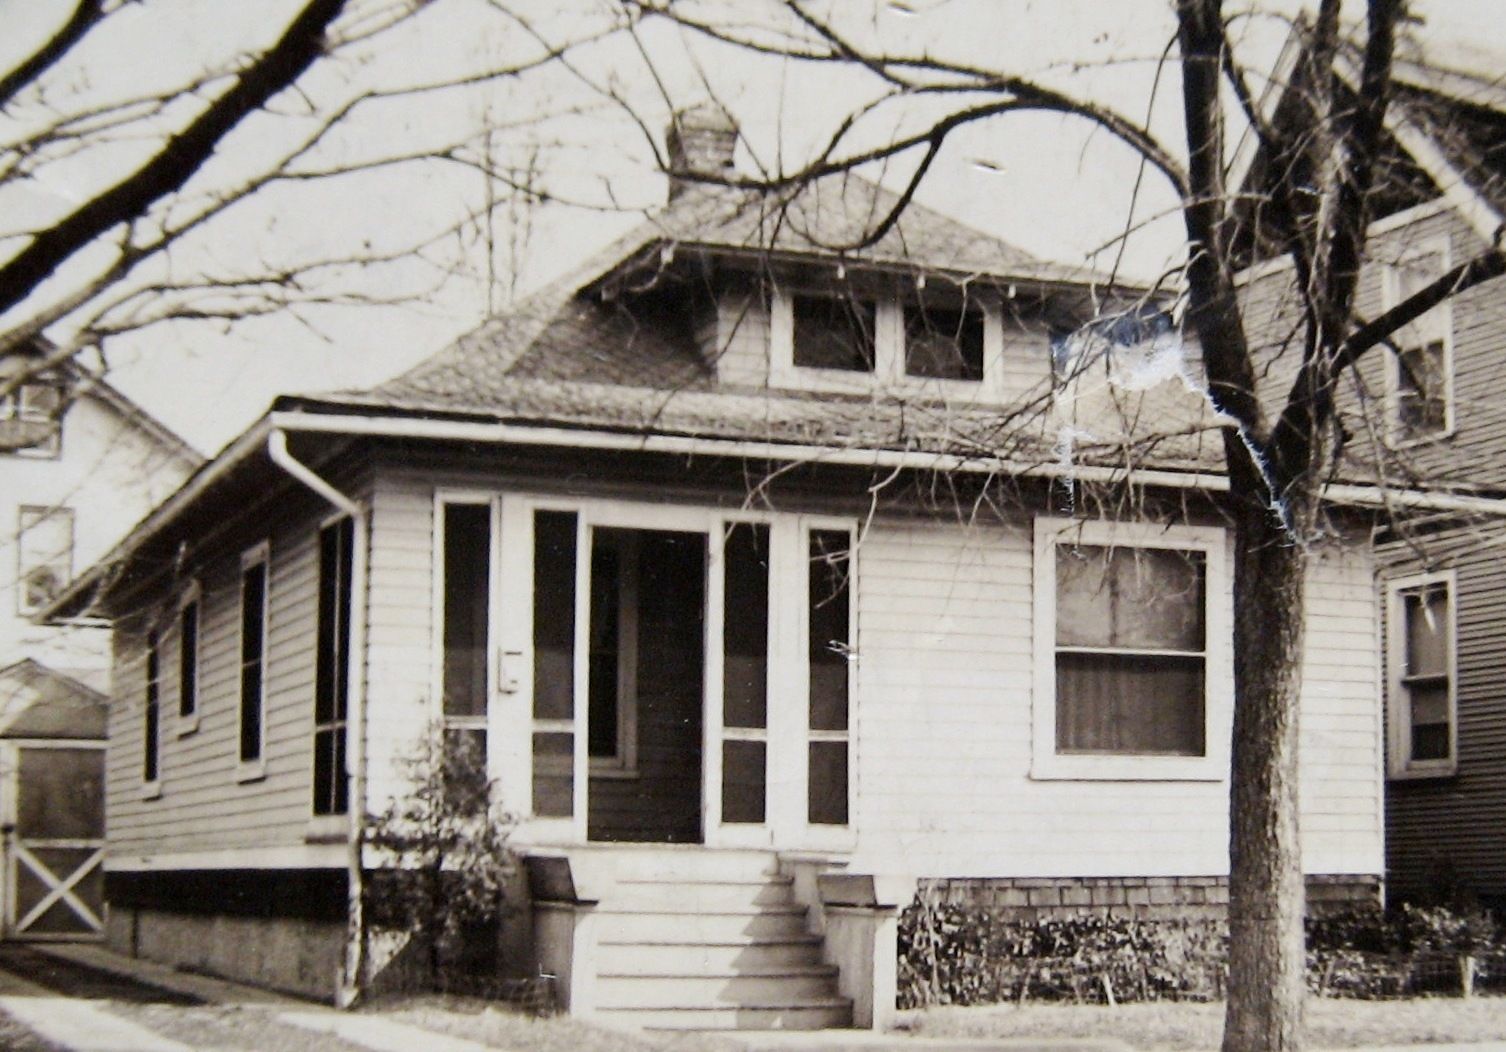 The house that started it all, The Ethel, has not been found anywhere but Norfolk, Virginia. 